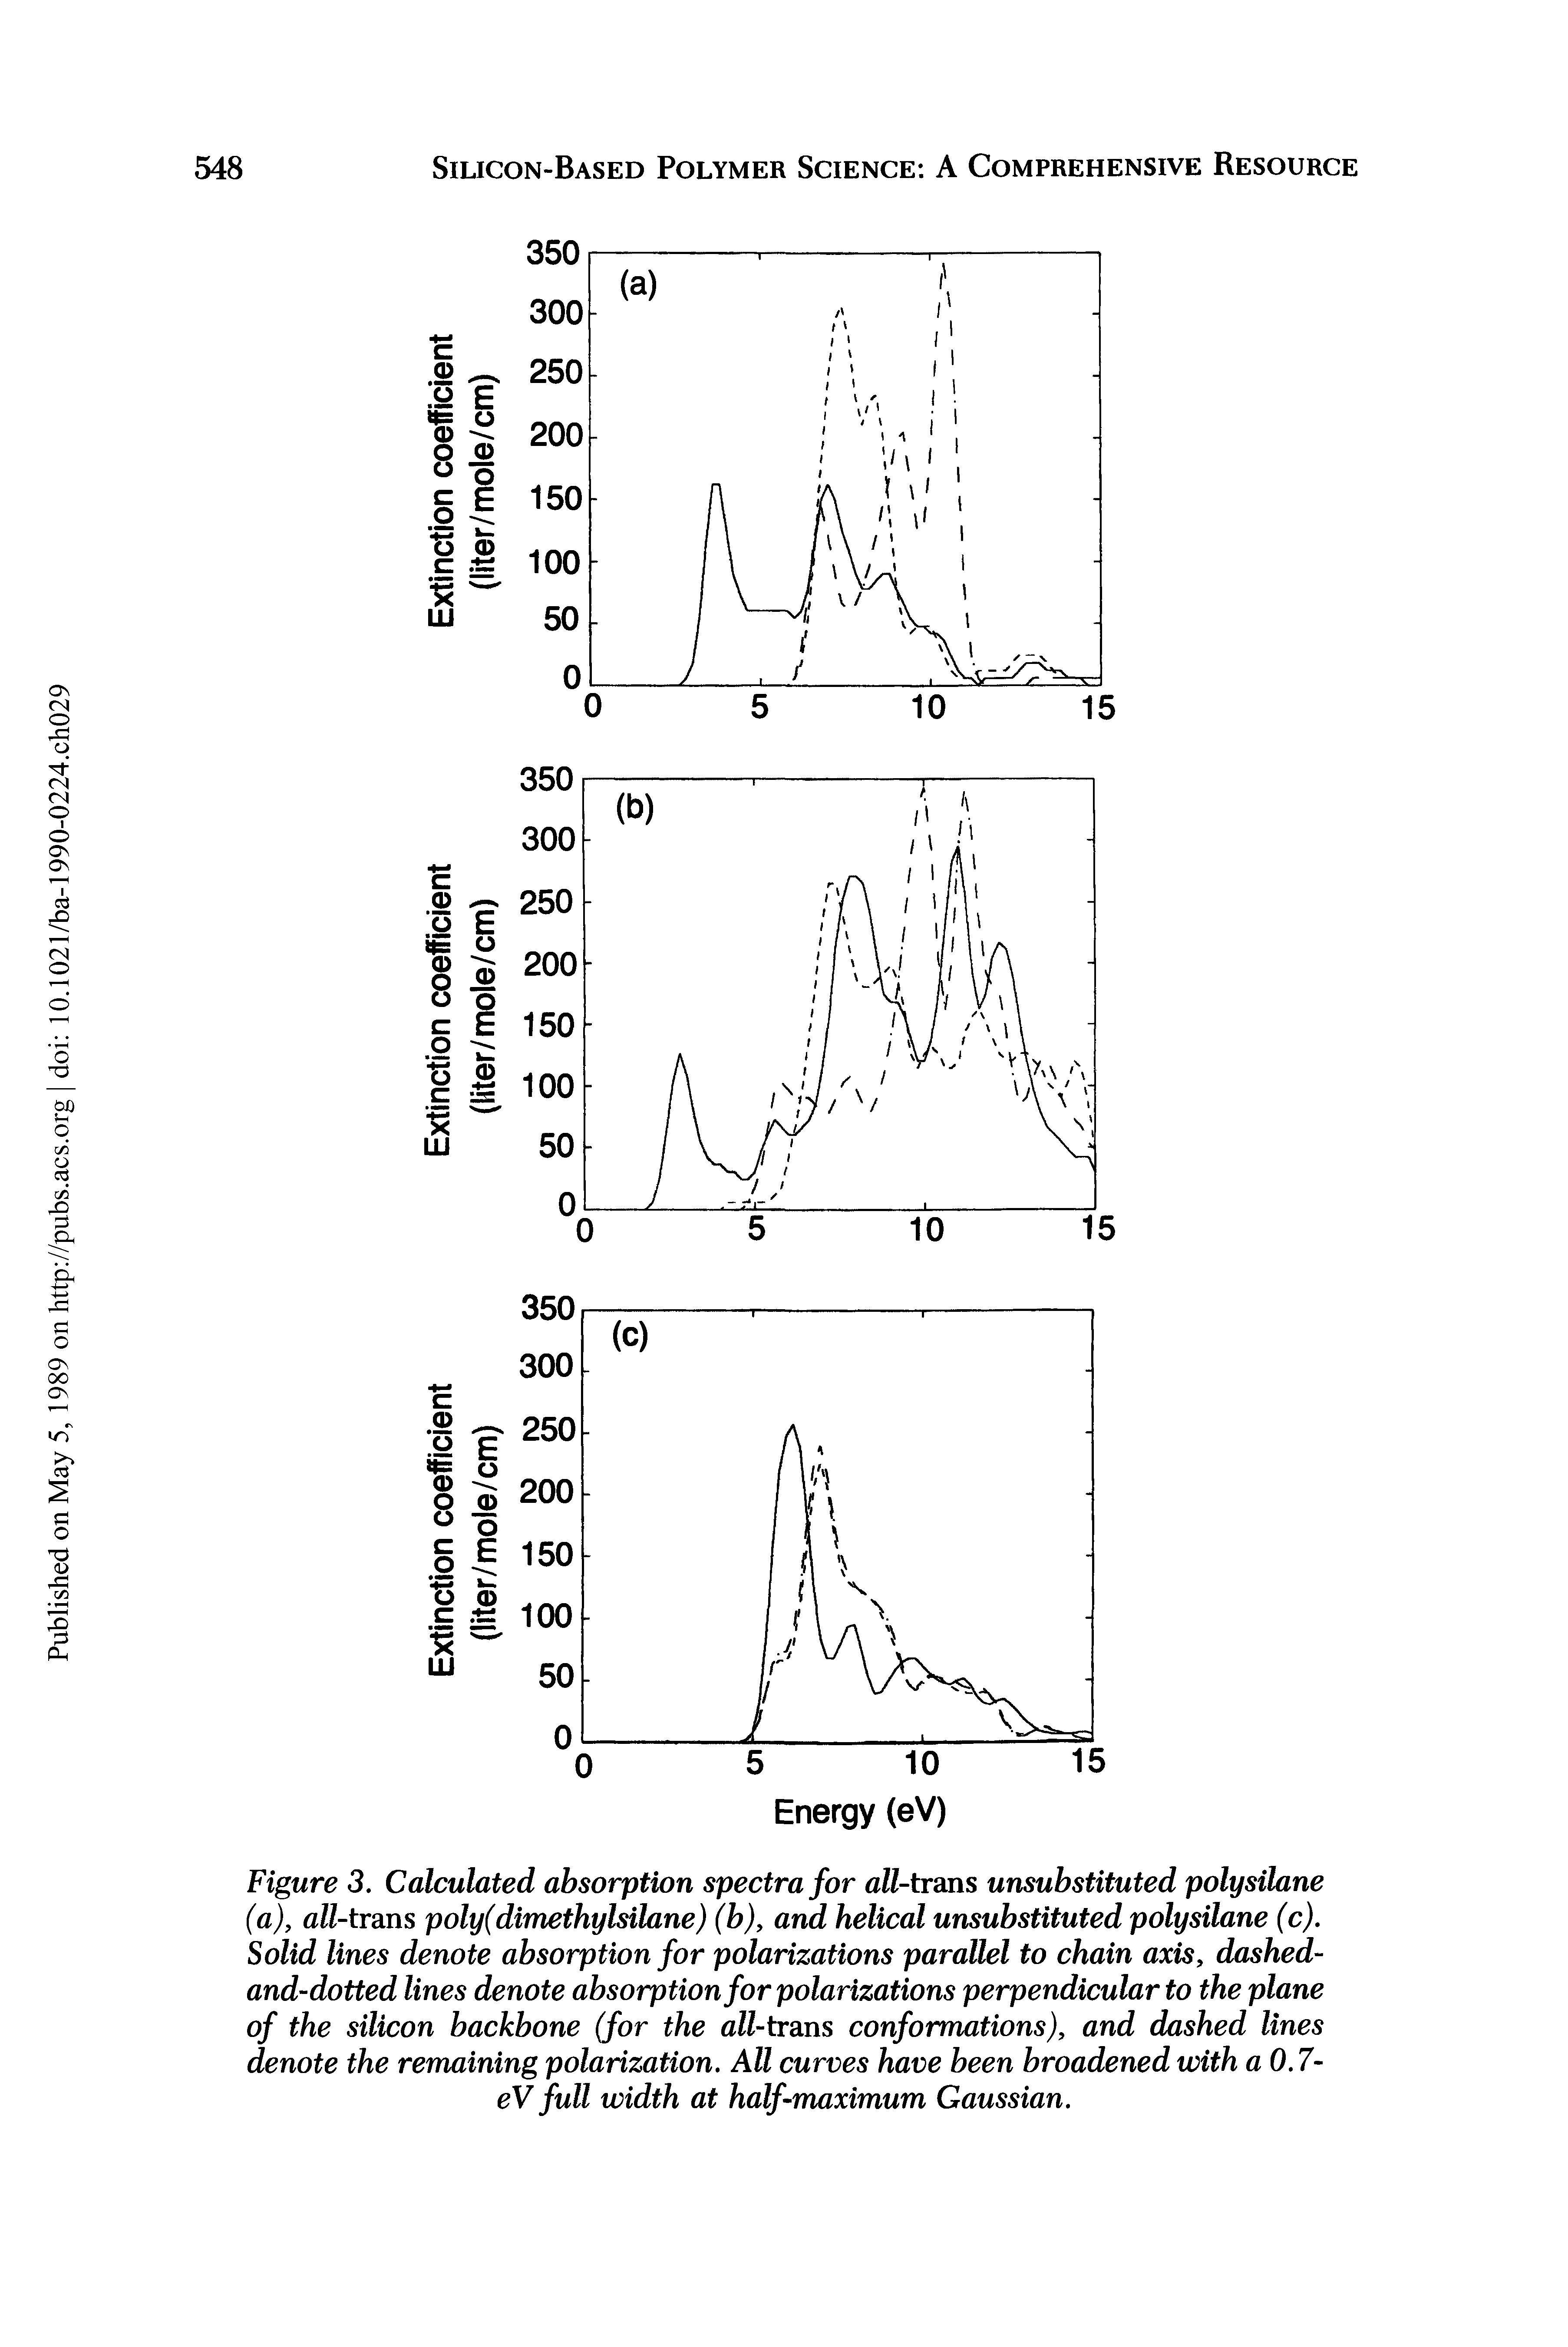 Figure 3. Calculated absorption spectra for all-trans unsubstituted polysilane (a), all-trans poly(dimethylsilane) (b), and helical unsubstituted polysilane (c). Solid lines denote absorption for polarizations parallel to chain axis, dashed-and-dotted lines denote absorption for polarizations perpendicular to the plane of the silicon backbone (for the all-trans conformations), and dashed lines denote the remaining polarization. All curves have been broadened with a 0.7-eV full width at half-maximum Gaussian.